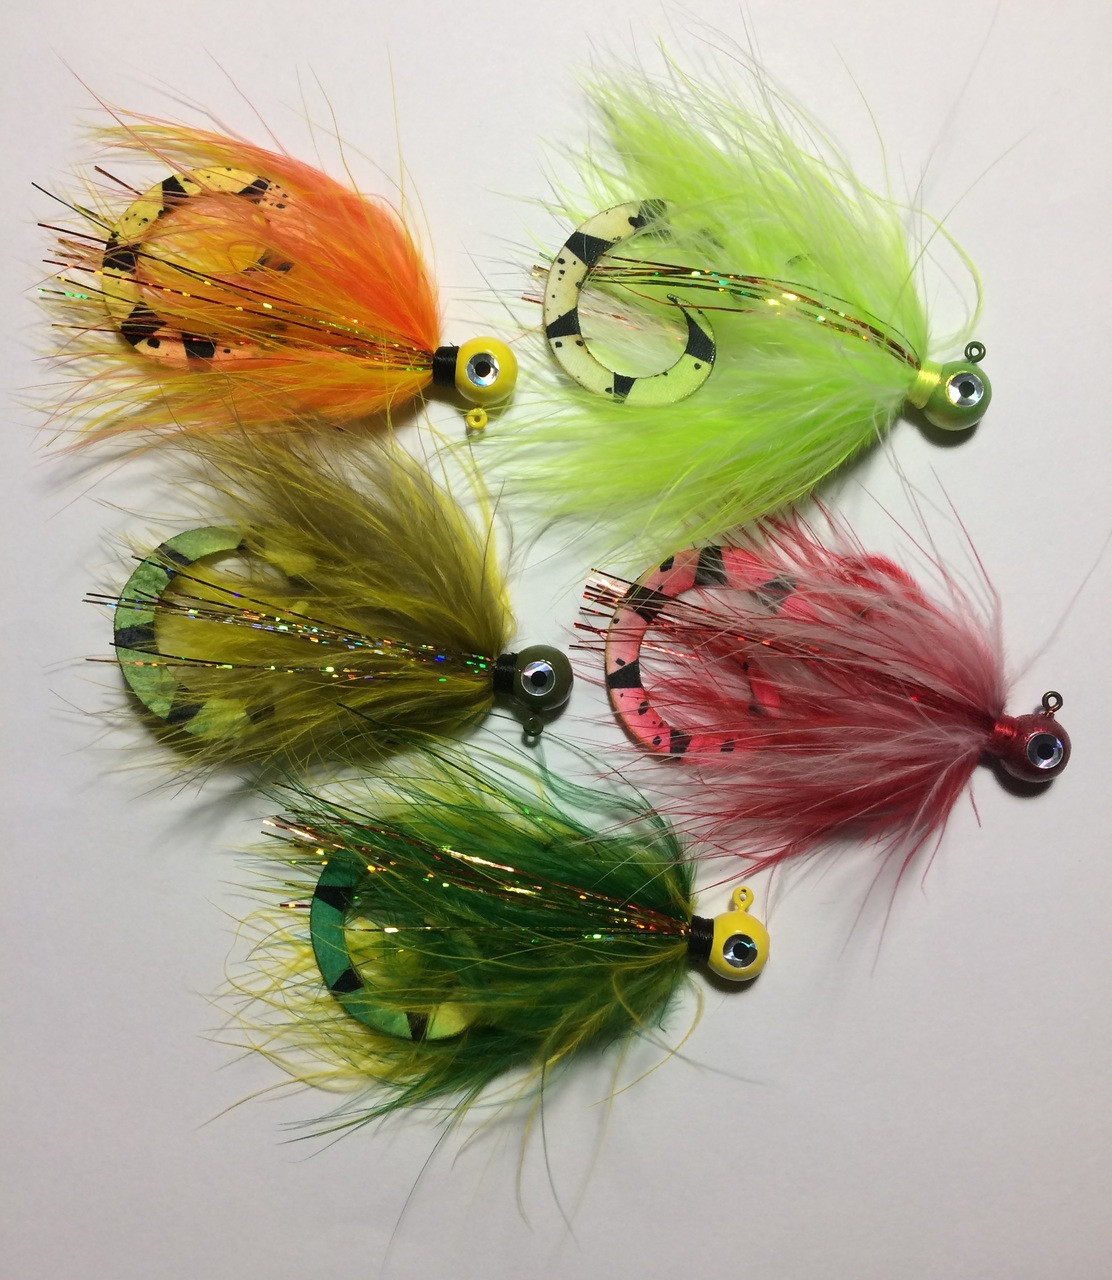 Palmered Marabou Jigs - Perch Patterns - Curly Tails - Haggerty Lures